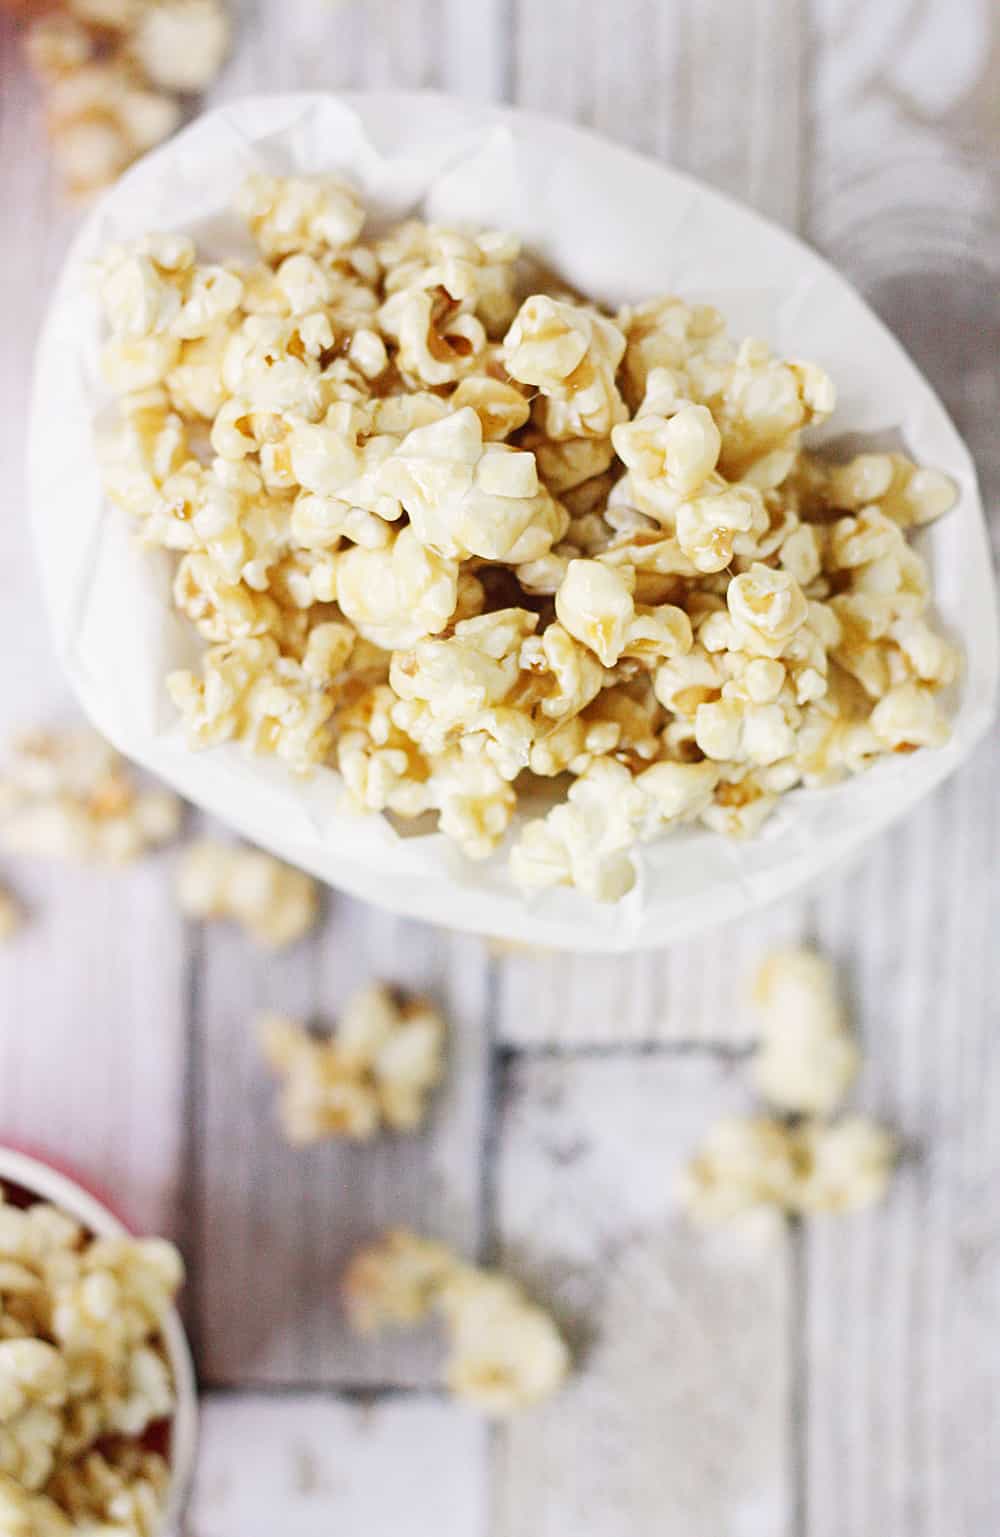 Easy Caramel Popcorn - Who doesn't love a quick, delicious, easy caramel popcorn recipe? The first time you try this easy homemade caramel popcorn, you'll be hooked! #popcorn #caramelpopcorn #halfscratched #caramel #dessert #easyrecipe #sweet